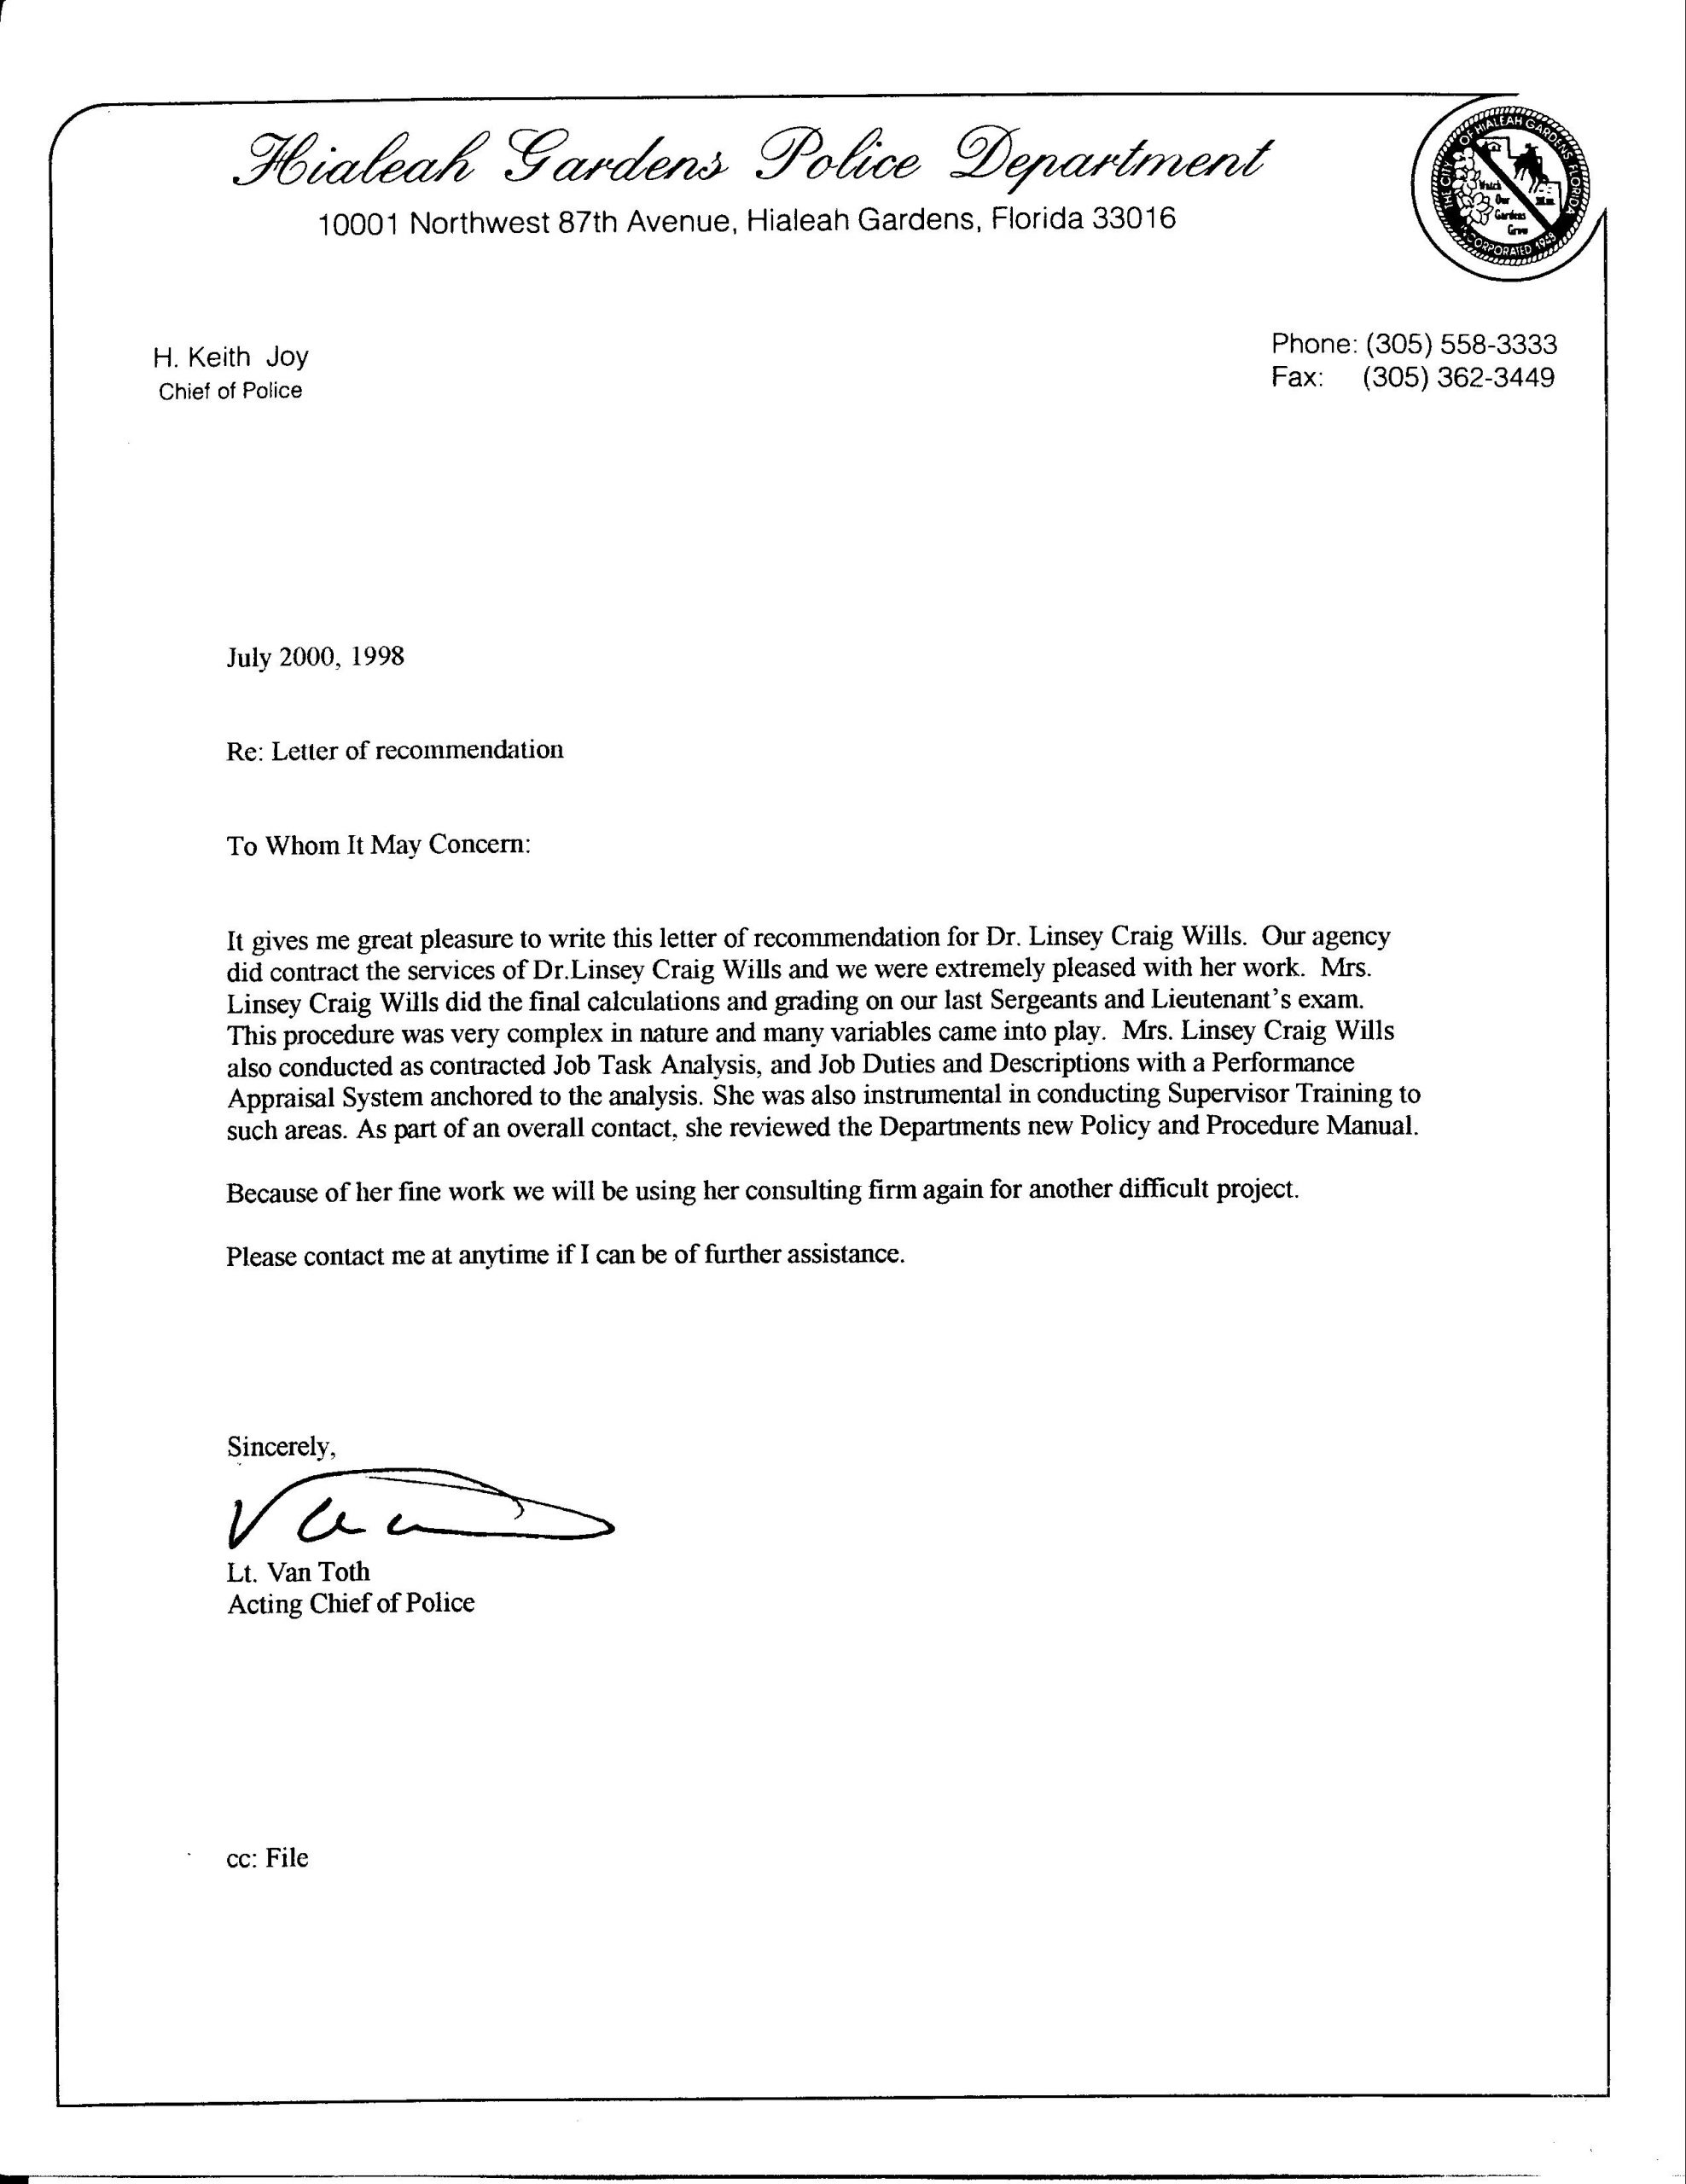 Police Officer Recommendation Letter Sample Debandje throughout size 2547 X 3300